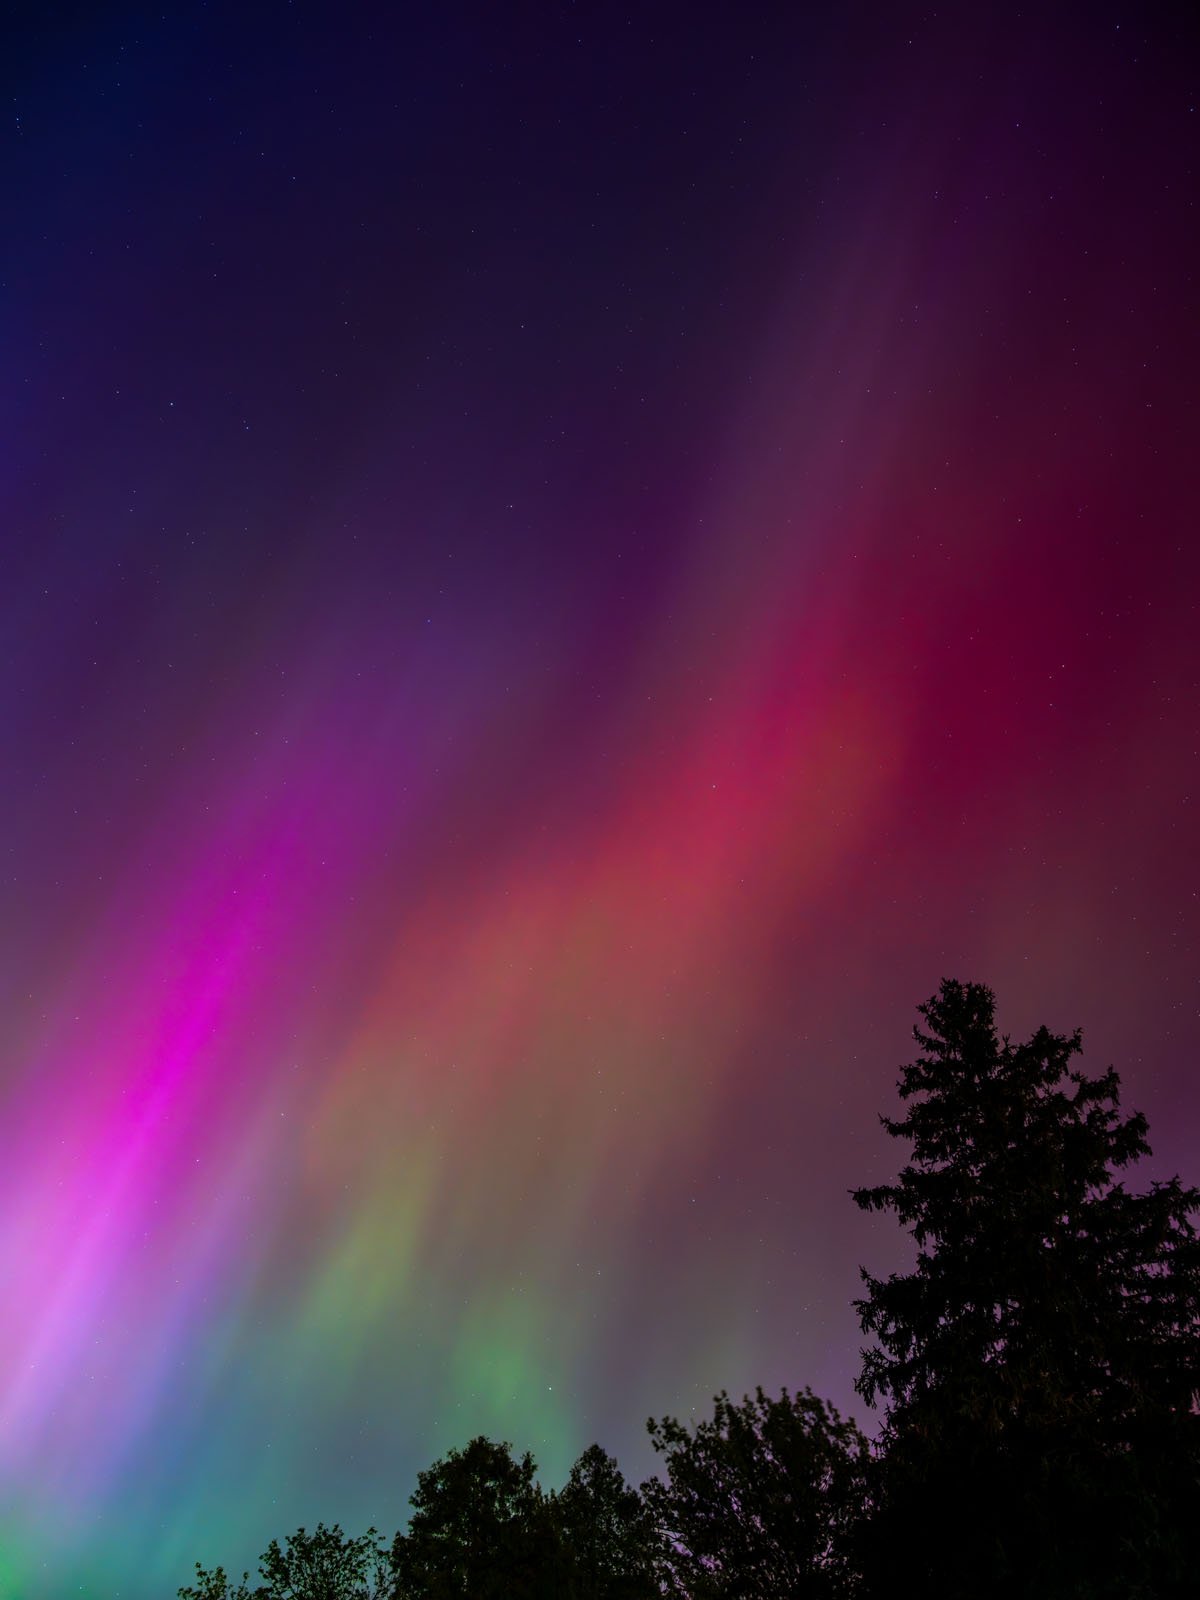 A vivid display of the Northern Lights in the sky, featuring radiant streaks of pink, green, and purple colors against a dark, starry backdrop, with silhouettes of tall trees at the bottom.